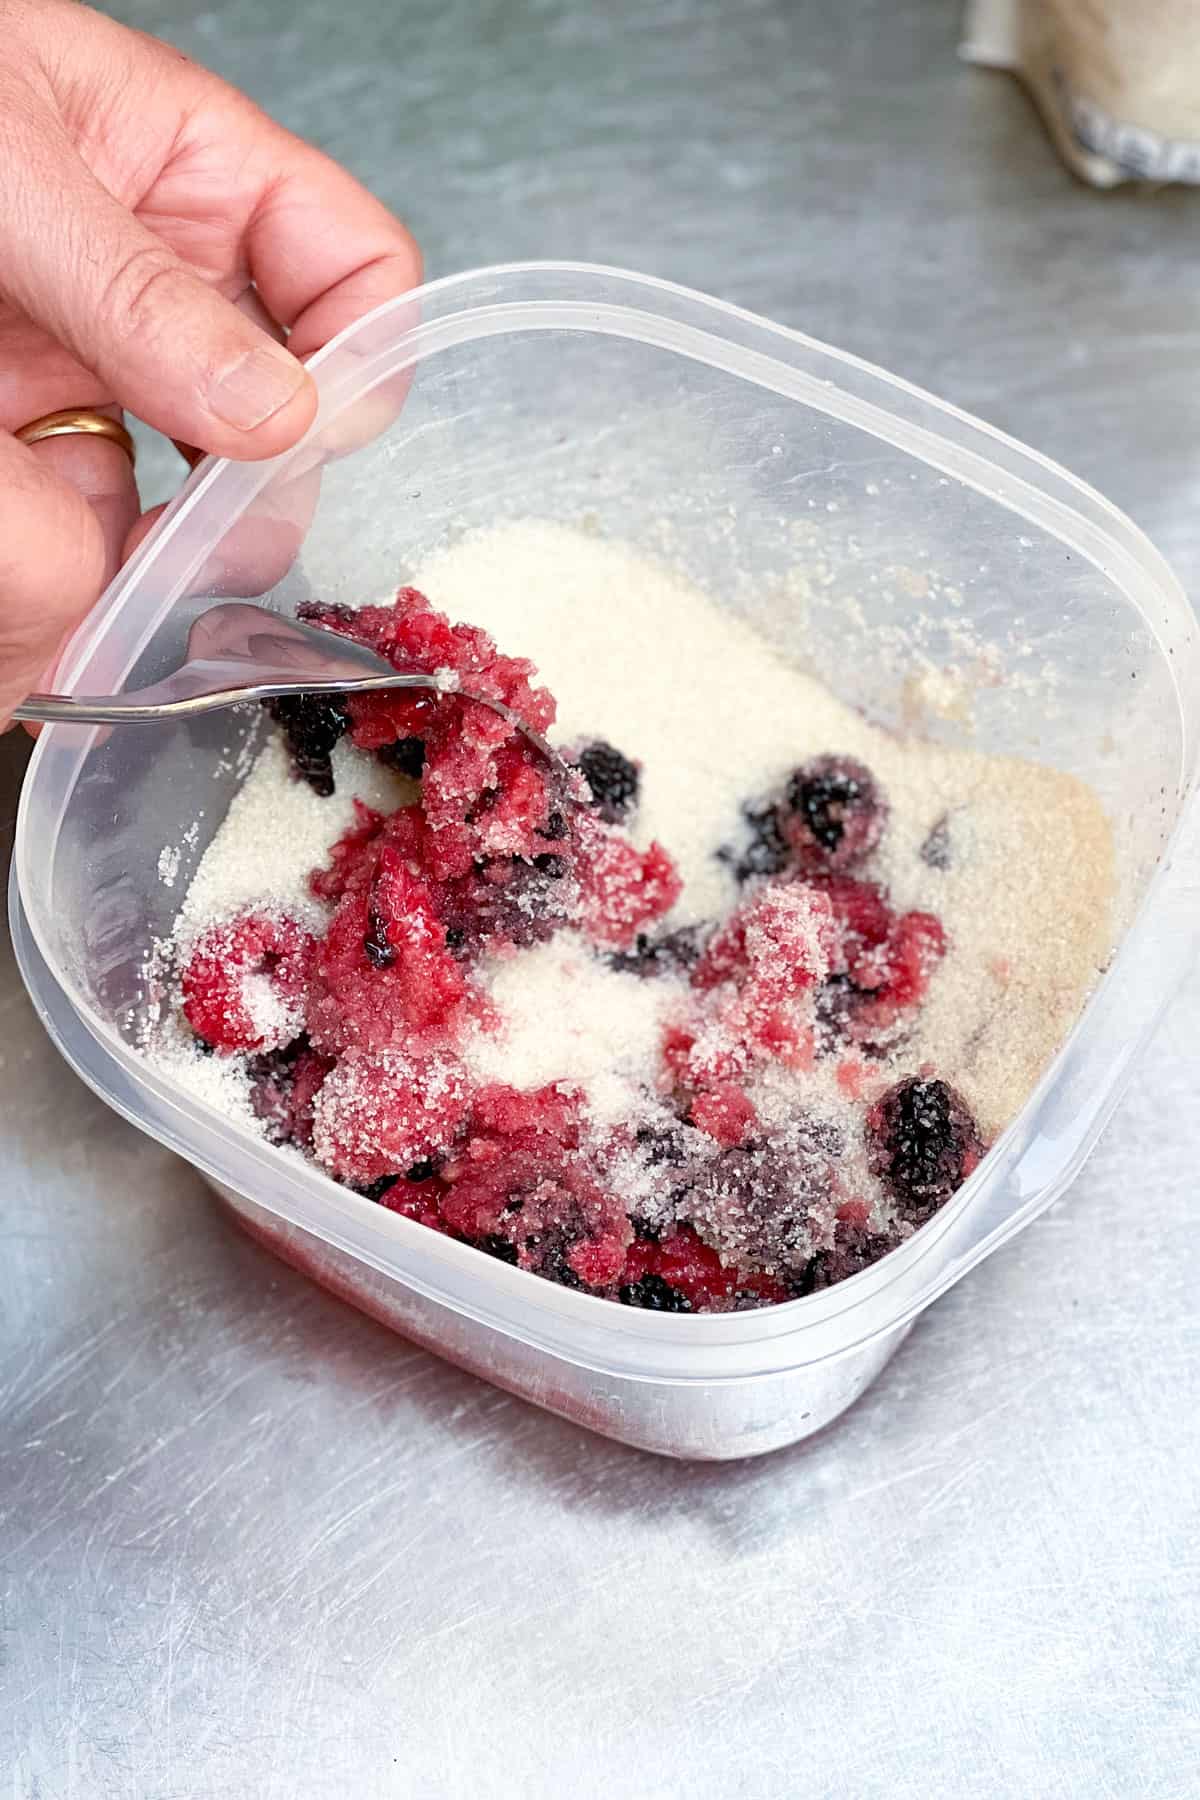 bruised raspberries and blackberries mixed with sugar in a plastic container